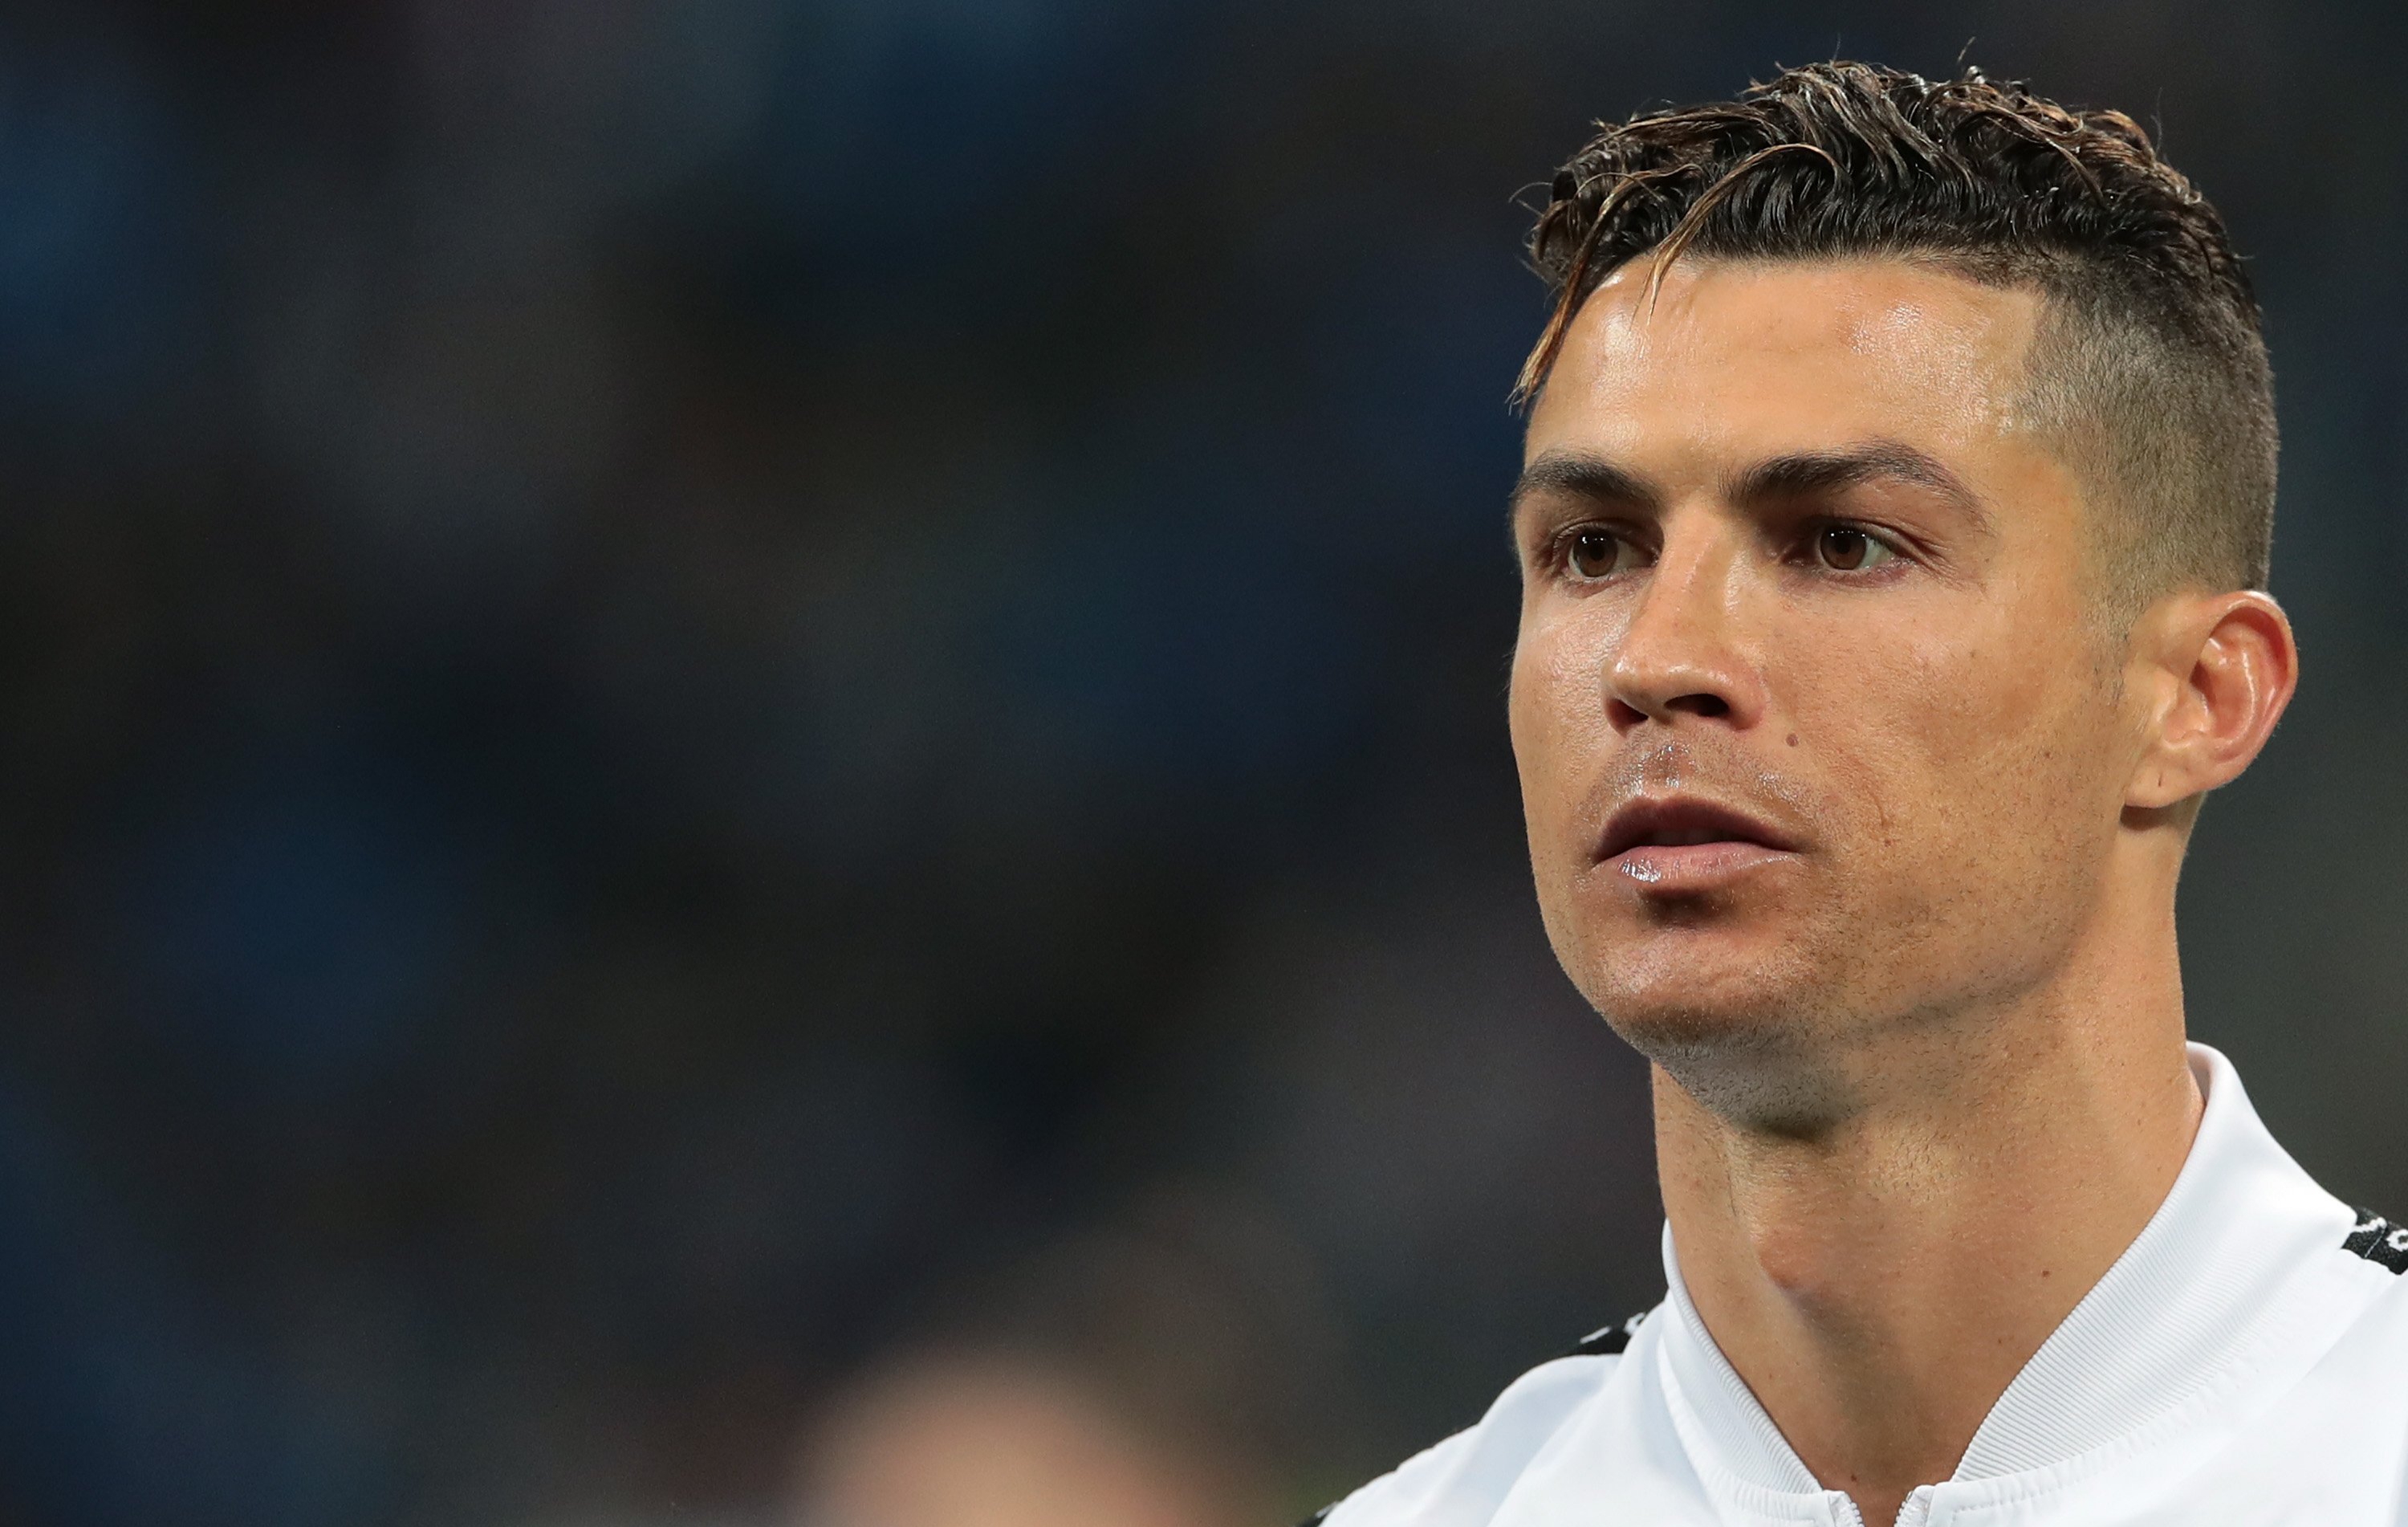 Ronaldo escapes criminal charges over alleged sexual assault on Kathryn Mayorga